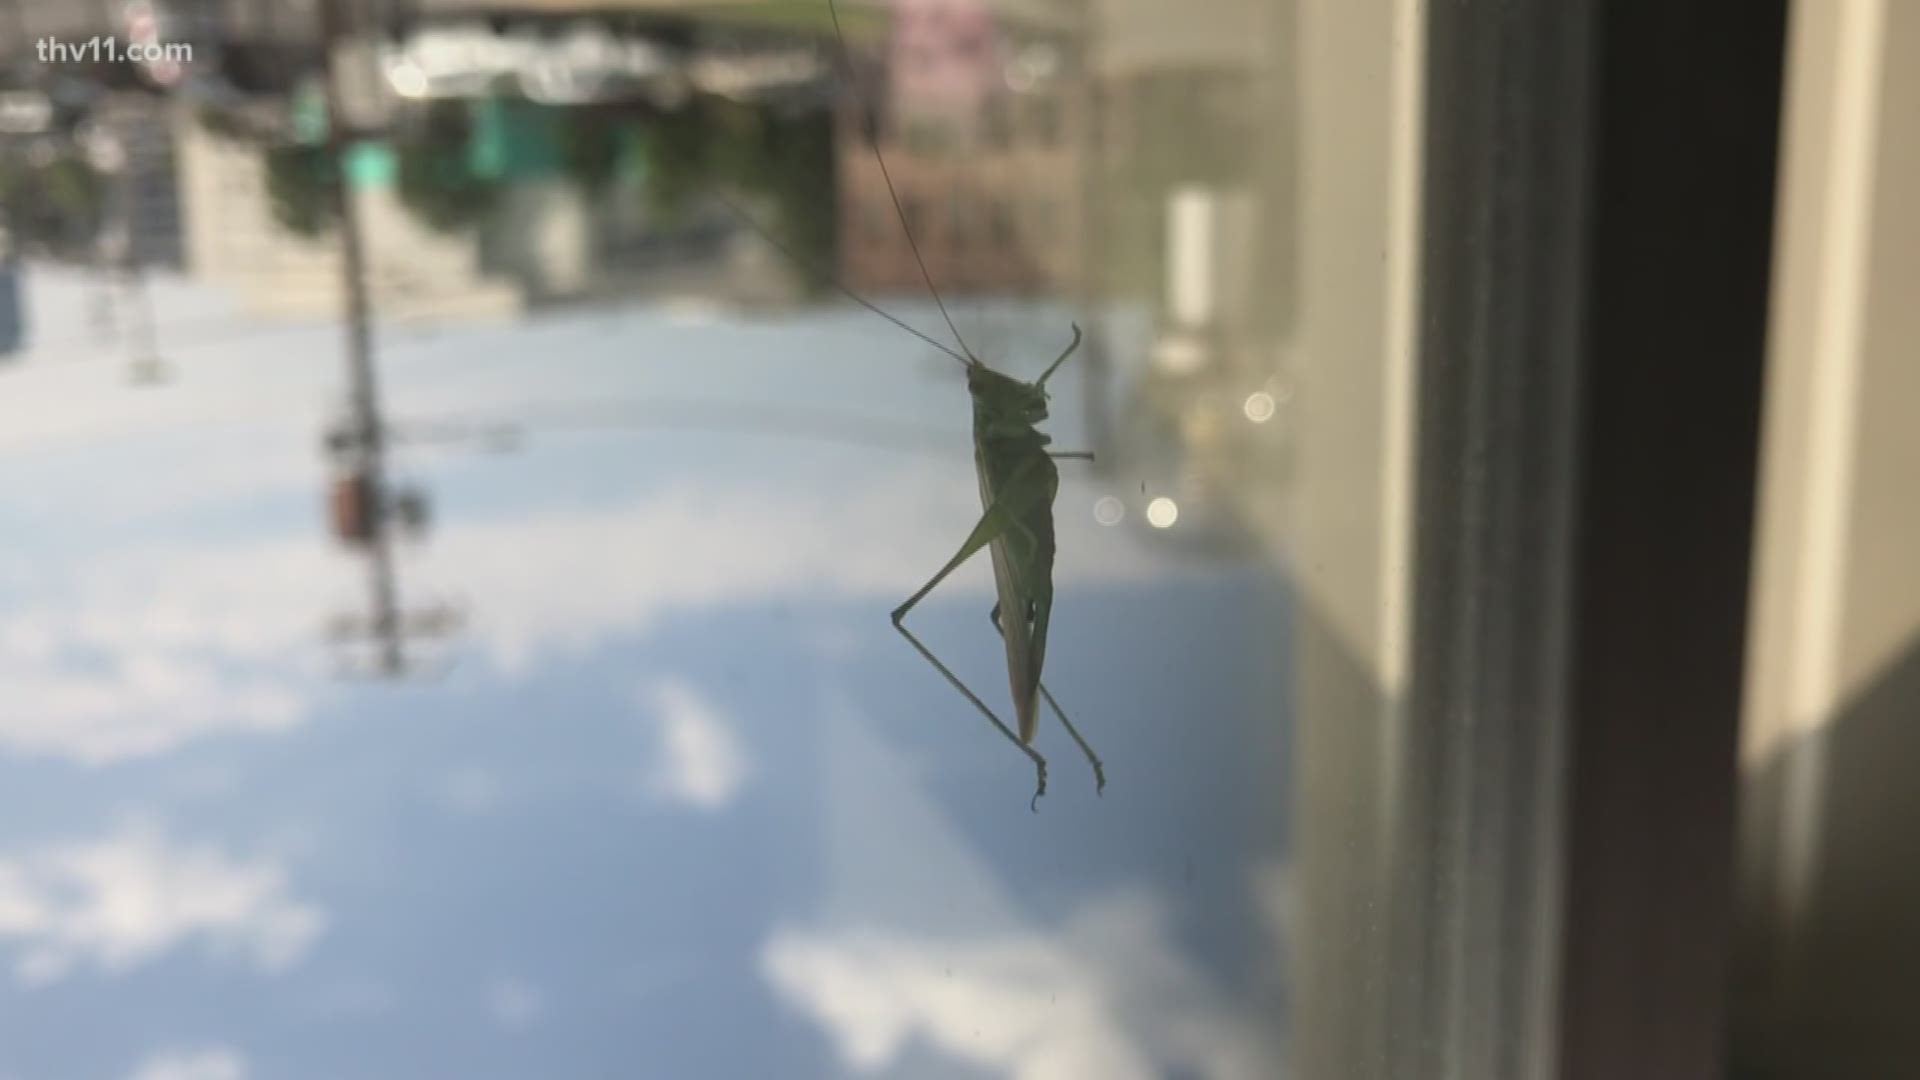 Little green grasshoppers seem to be invading Arkansas. They're easy to spot outside, but *why are they here?